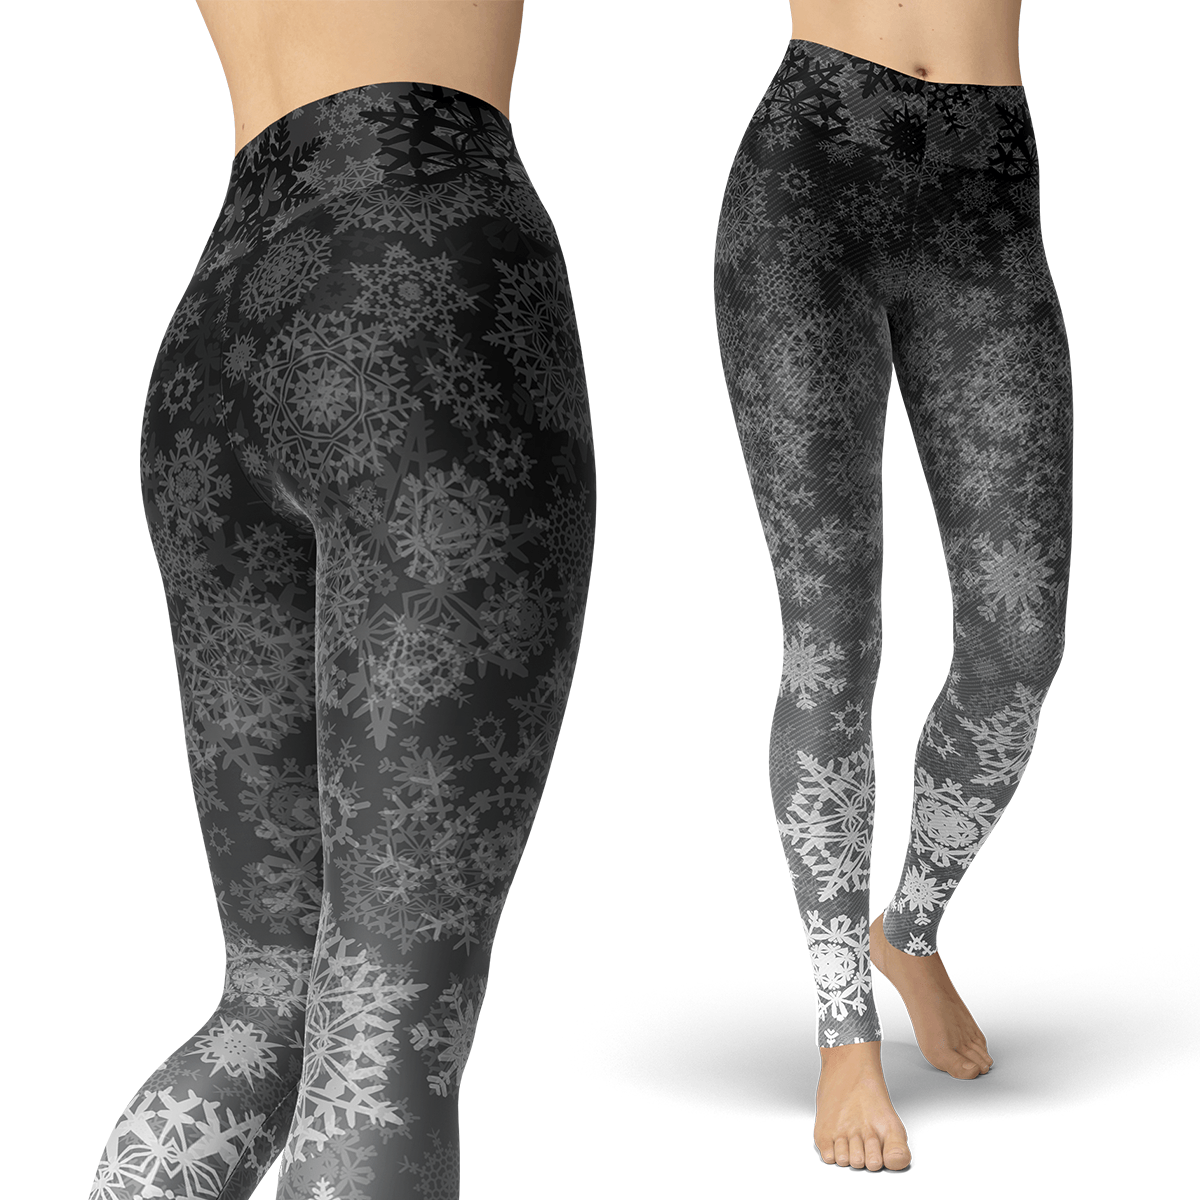 Just One Women's Black and White Snowflake Leggings 